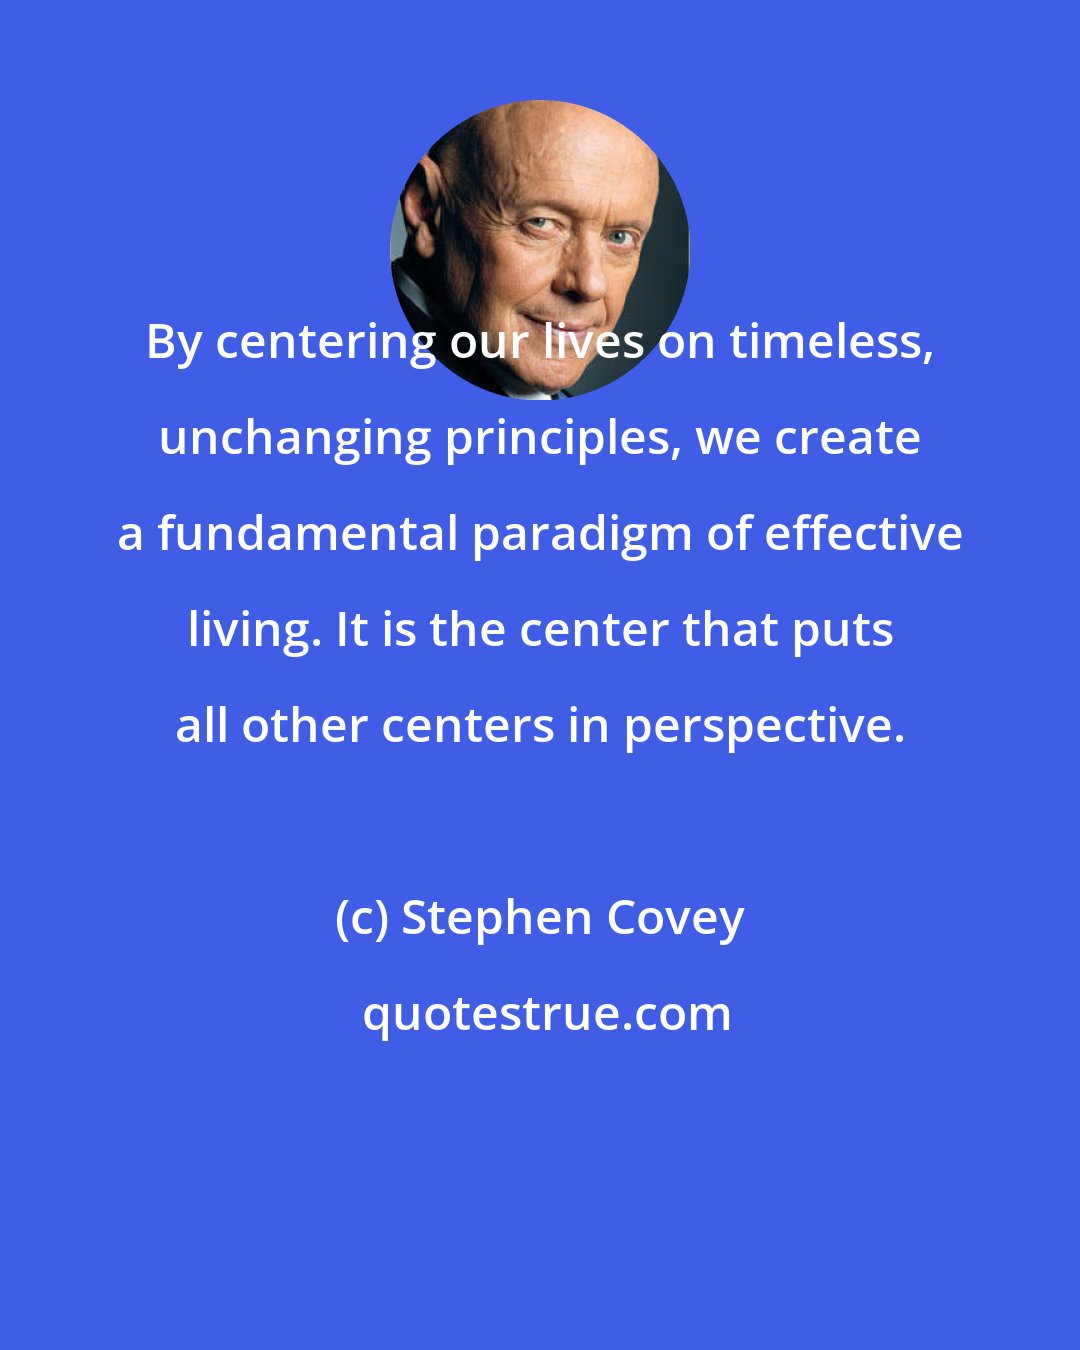 Stephen Covey: By centering our lives on timeless, unchanging principles, we create a fundamental paradigm of effective living. It is the center that puts all other centers in perspective.